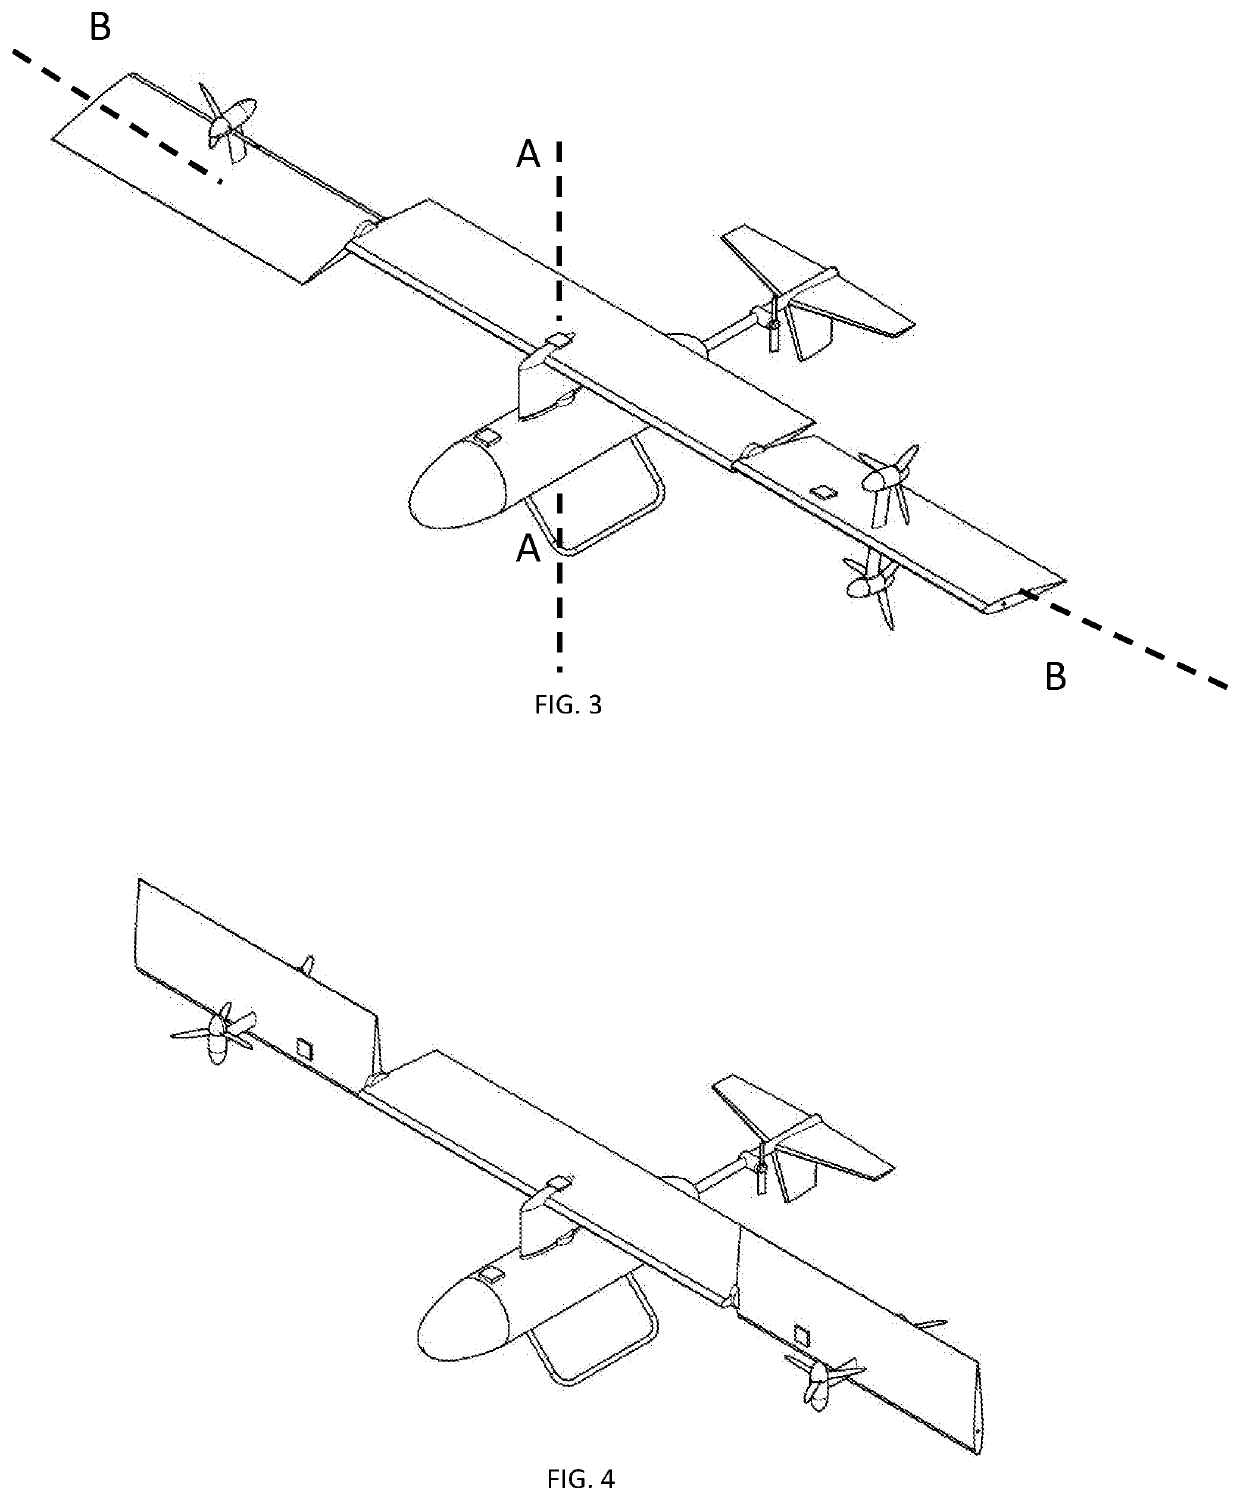 Pivoting wing system for vtol aircraft